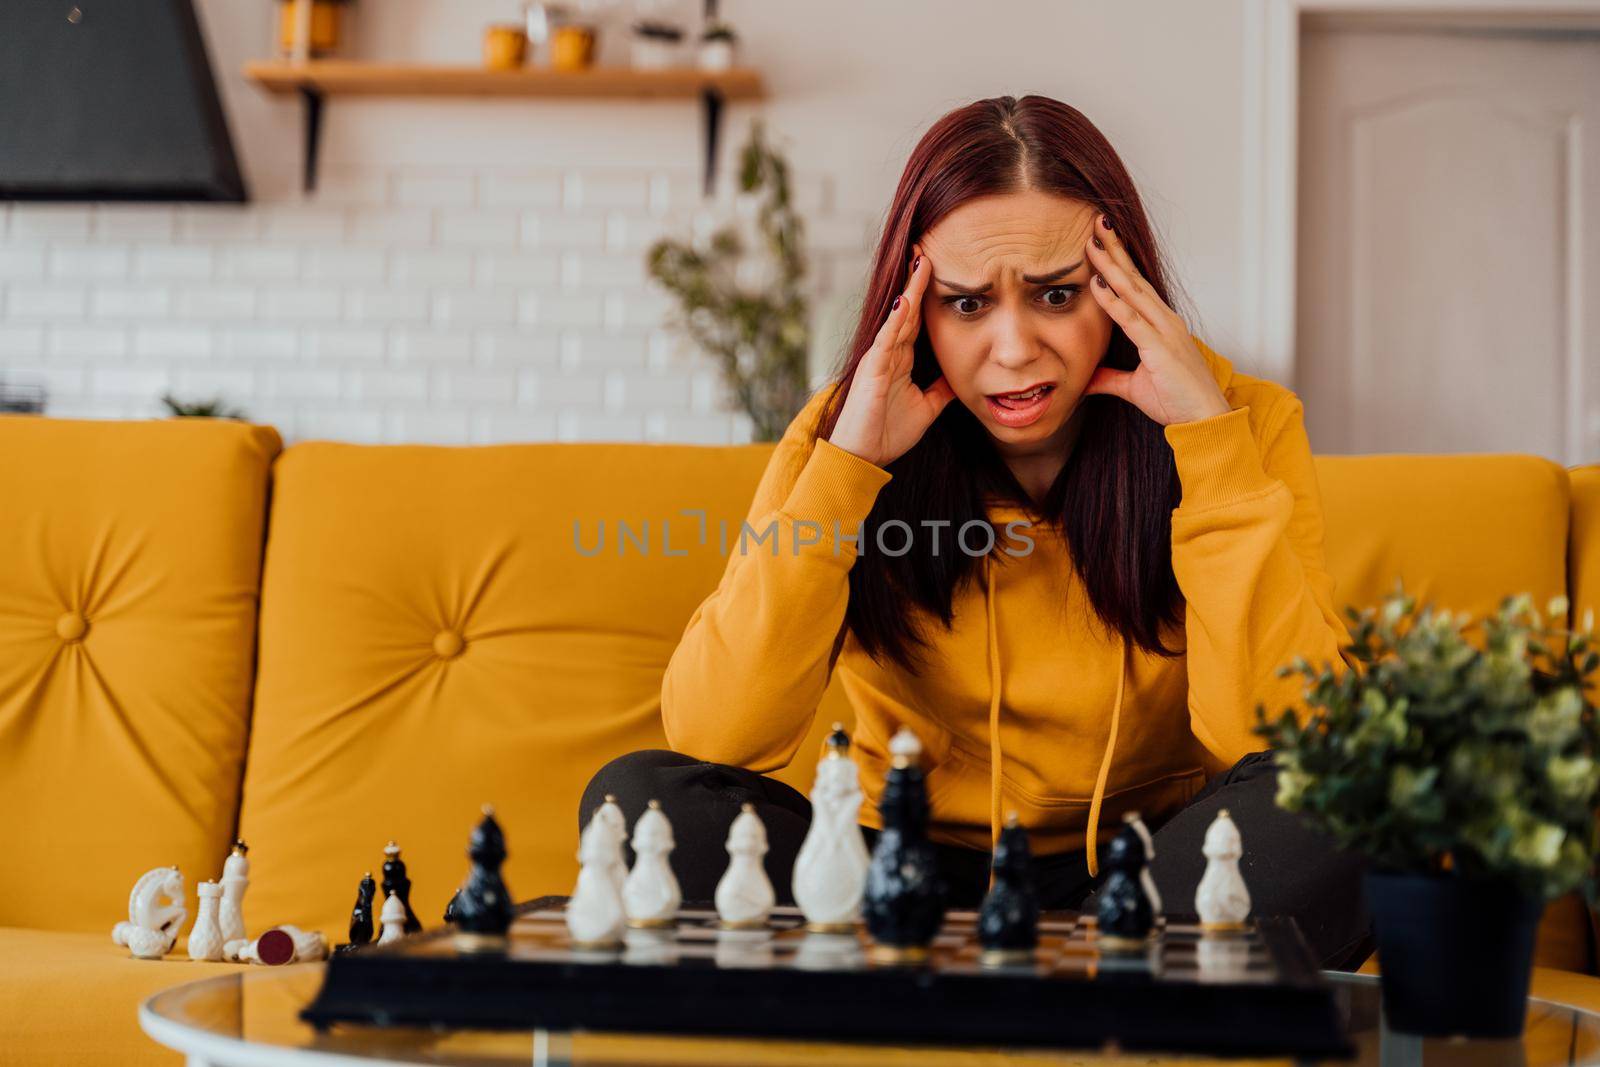 Young upset woman playing chess sitting on sofa. Distressed female plays in logical board game with herself in room